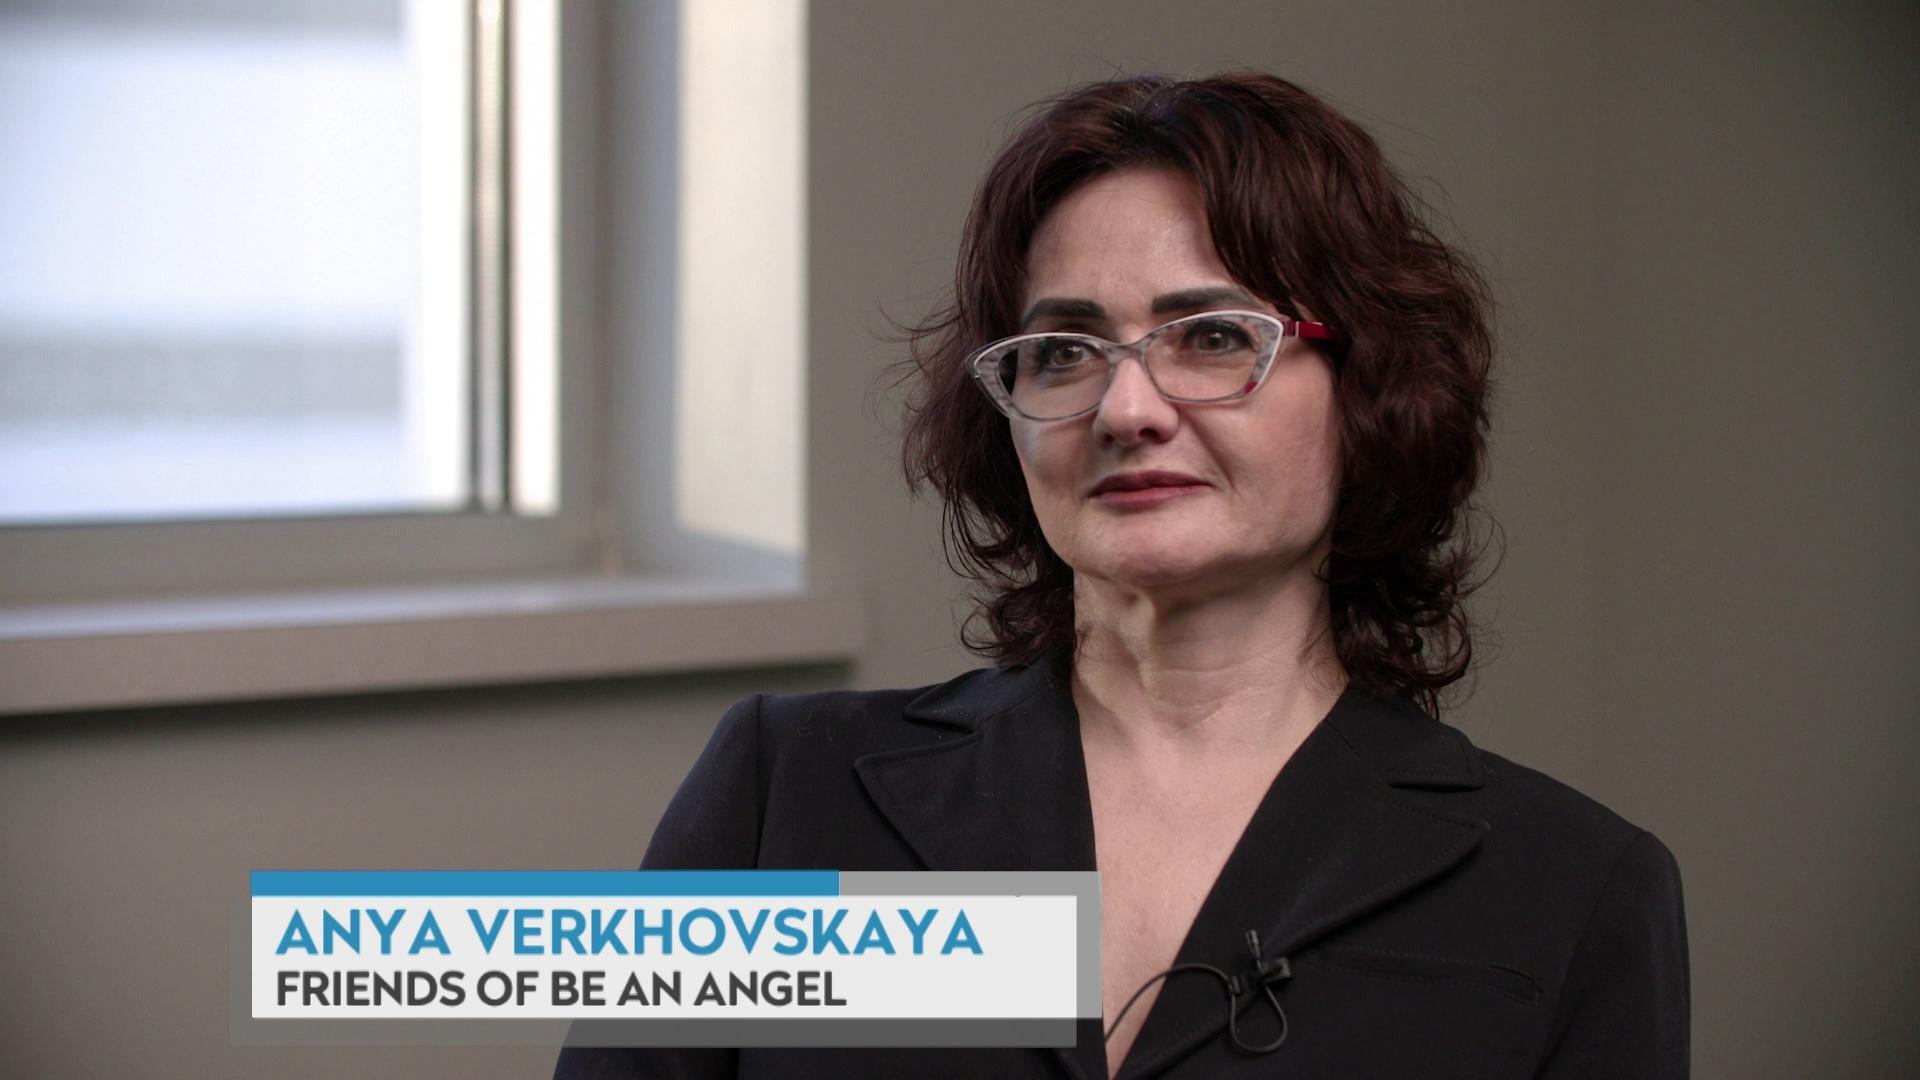 A still image from a video shows Anya Verkhovskaya sitting in a room with a window behind her right shoulder, with a graphic at bottom reading Anya Verkhovskaya and Friends of Be an Angel.